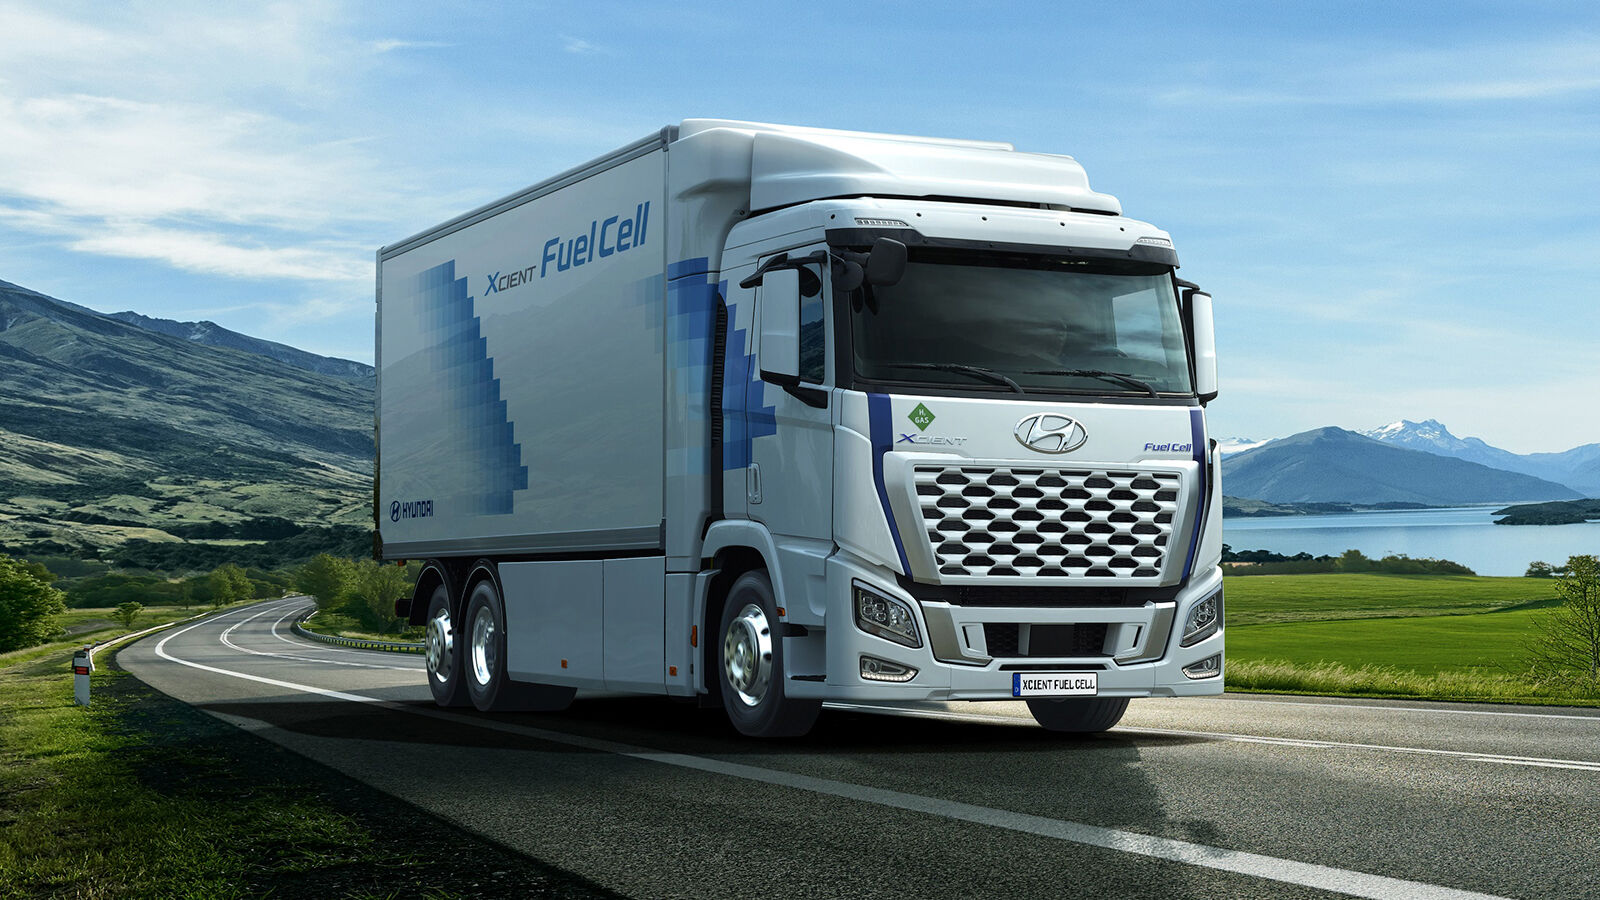 Hyundai Motor’s XCIENT Fuel Cell Trucks Achieve Record of 10 Million km Total Driving Distance in Switzerland